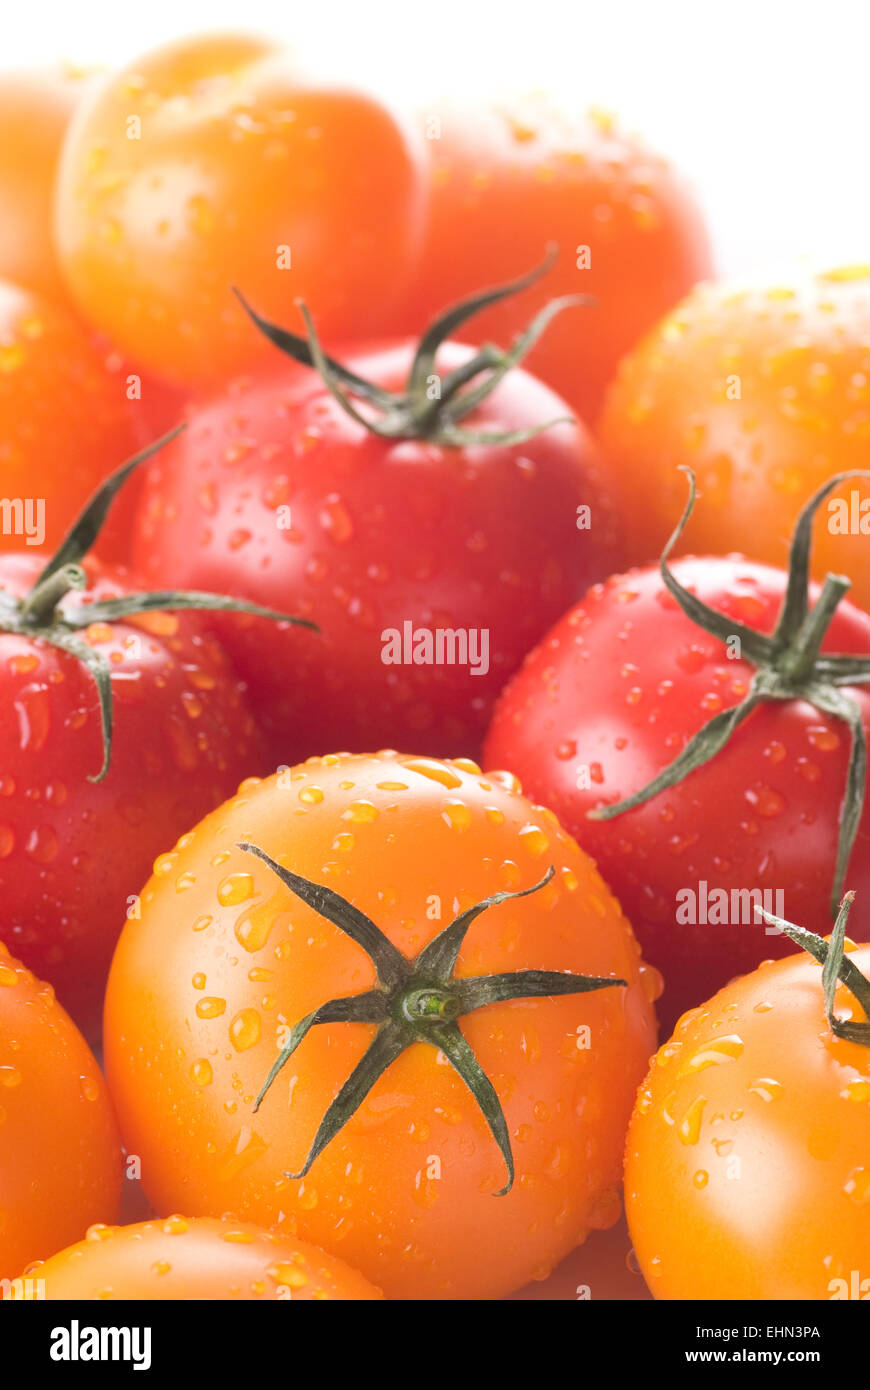 Red and yellow tomatoes, just rinsed. Stock Photo